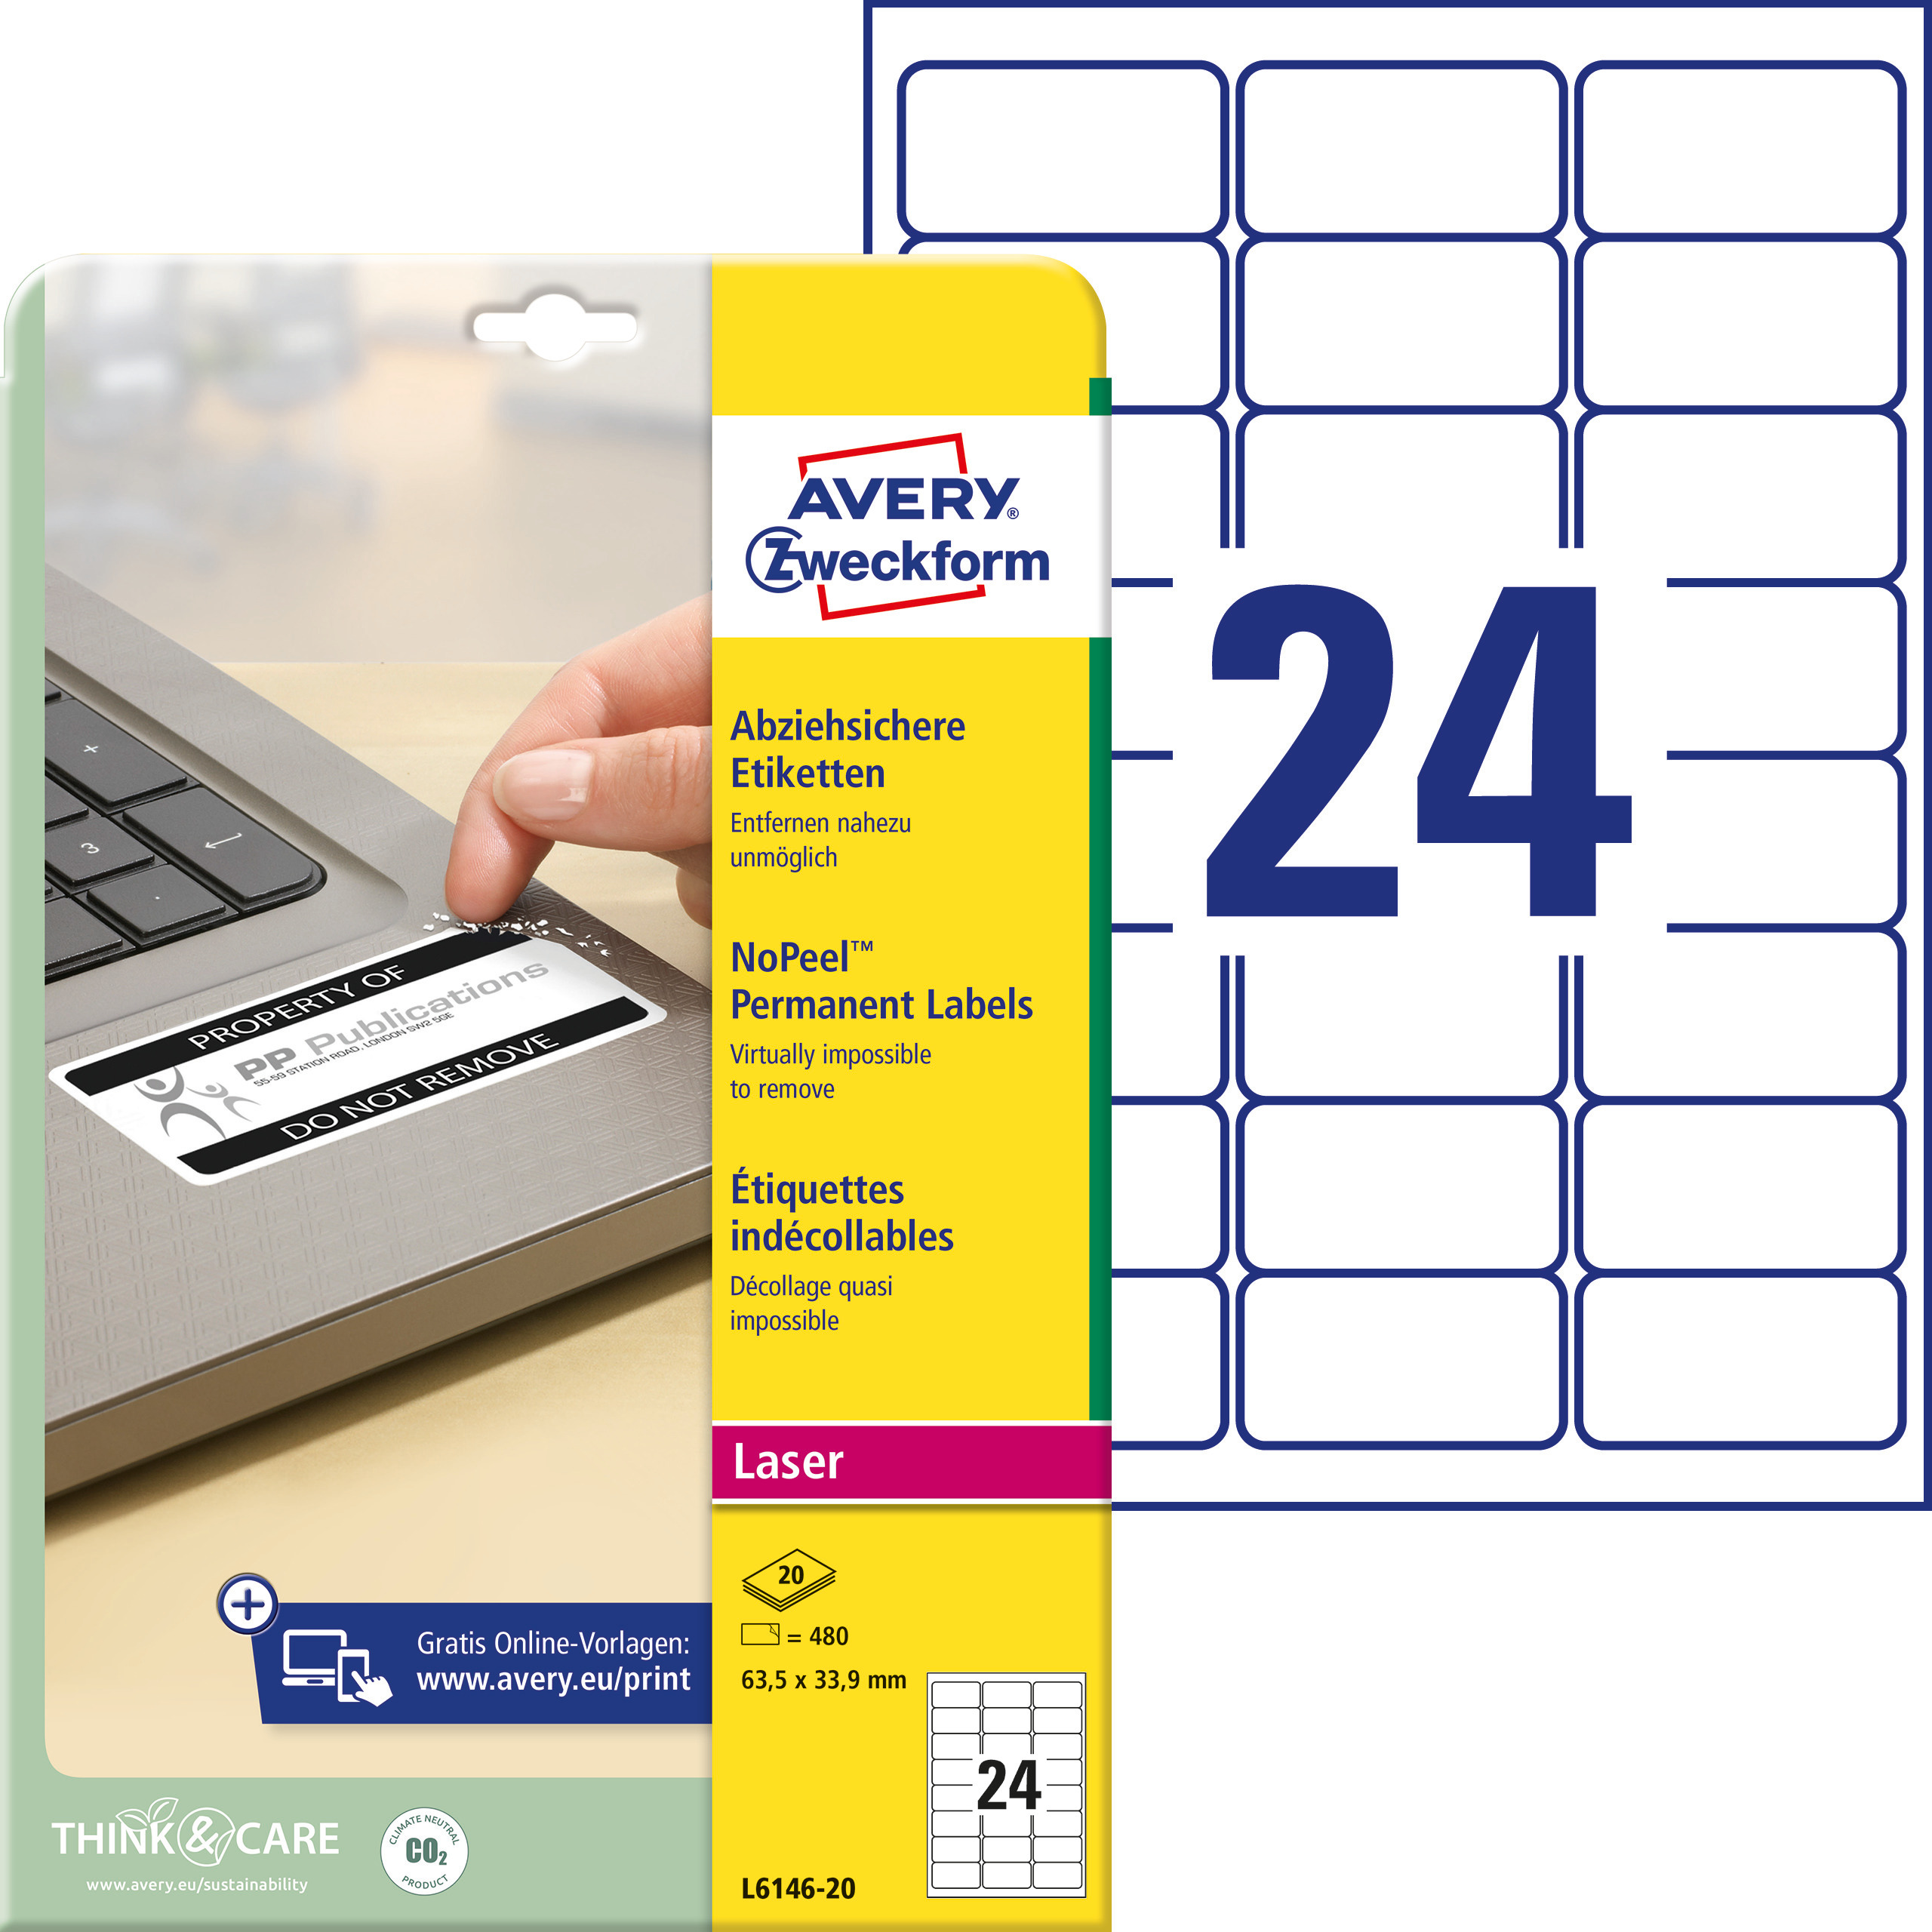 Self-adhesive labels Nopeel acrylic film for monochrome laser printers - 24 labels per sheet